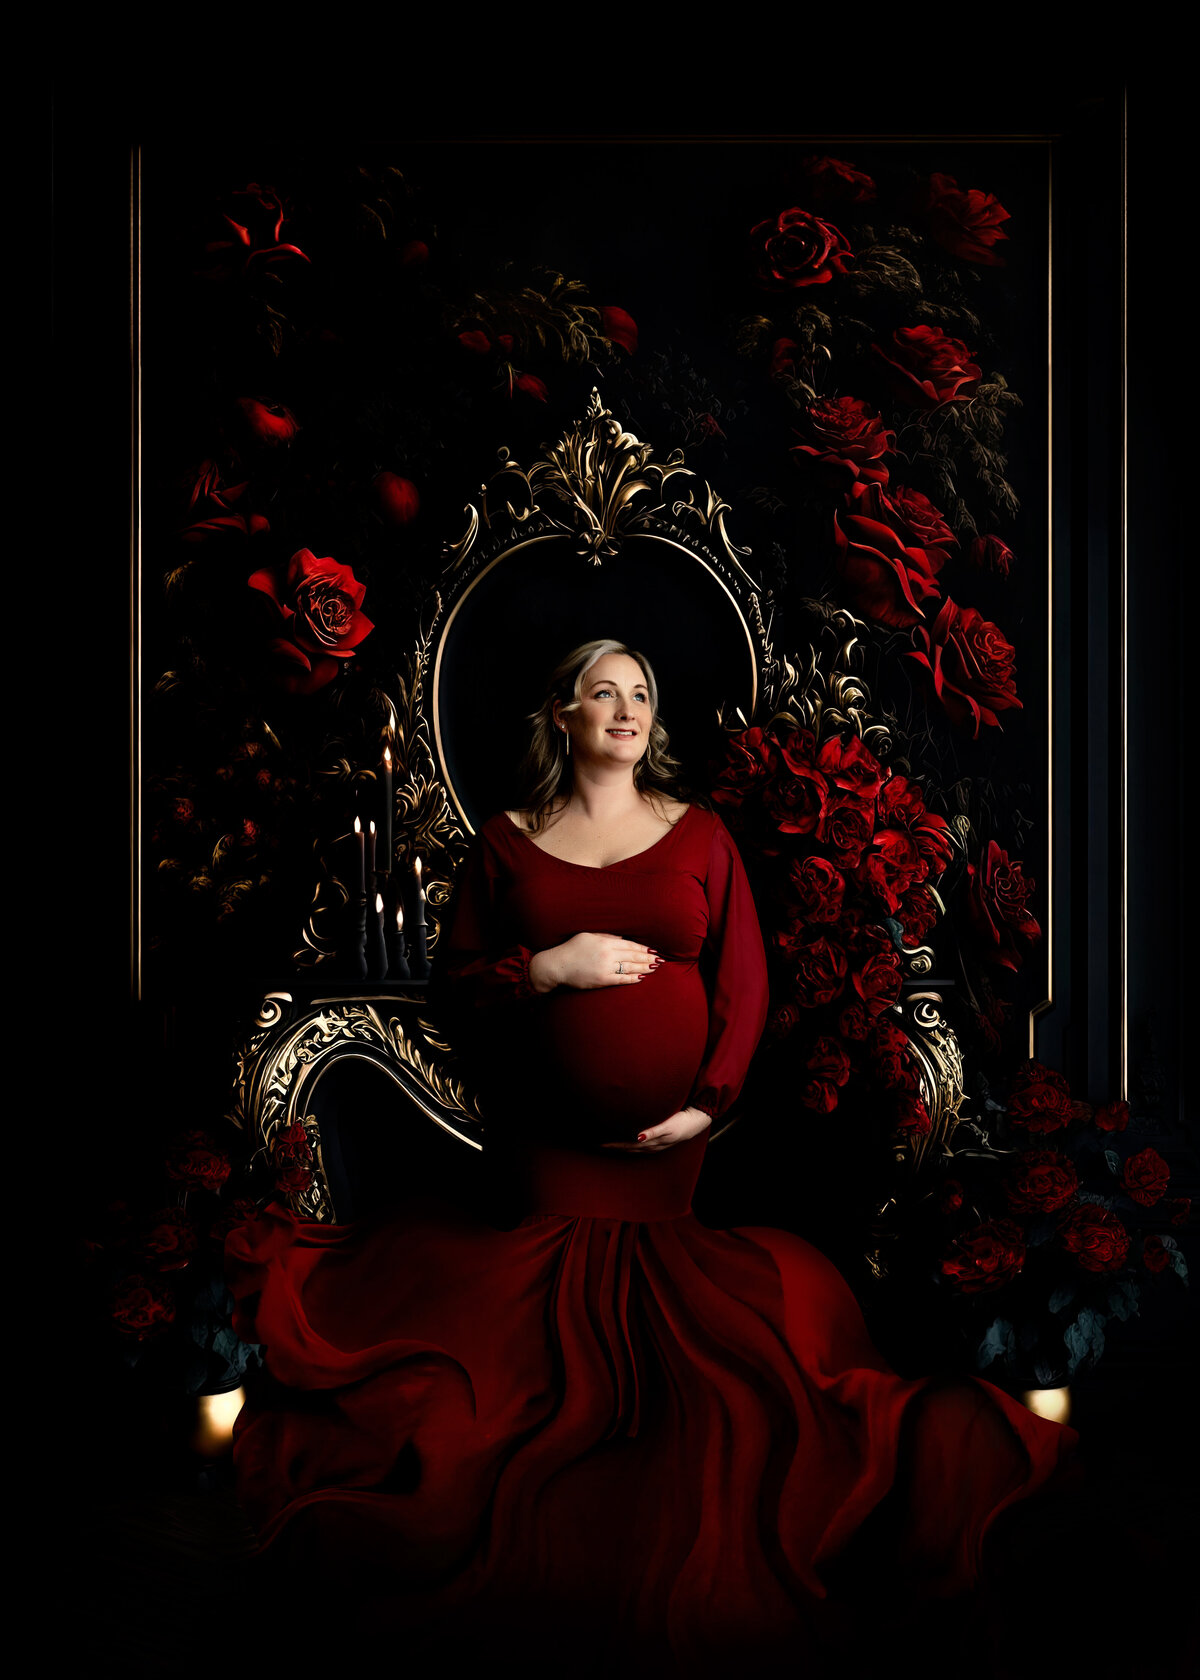 A happy mother to be stands holding her bump with both hands in a red maternity gown